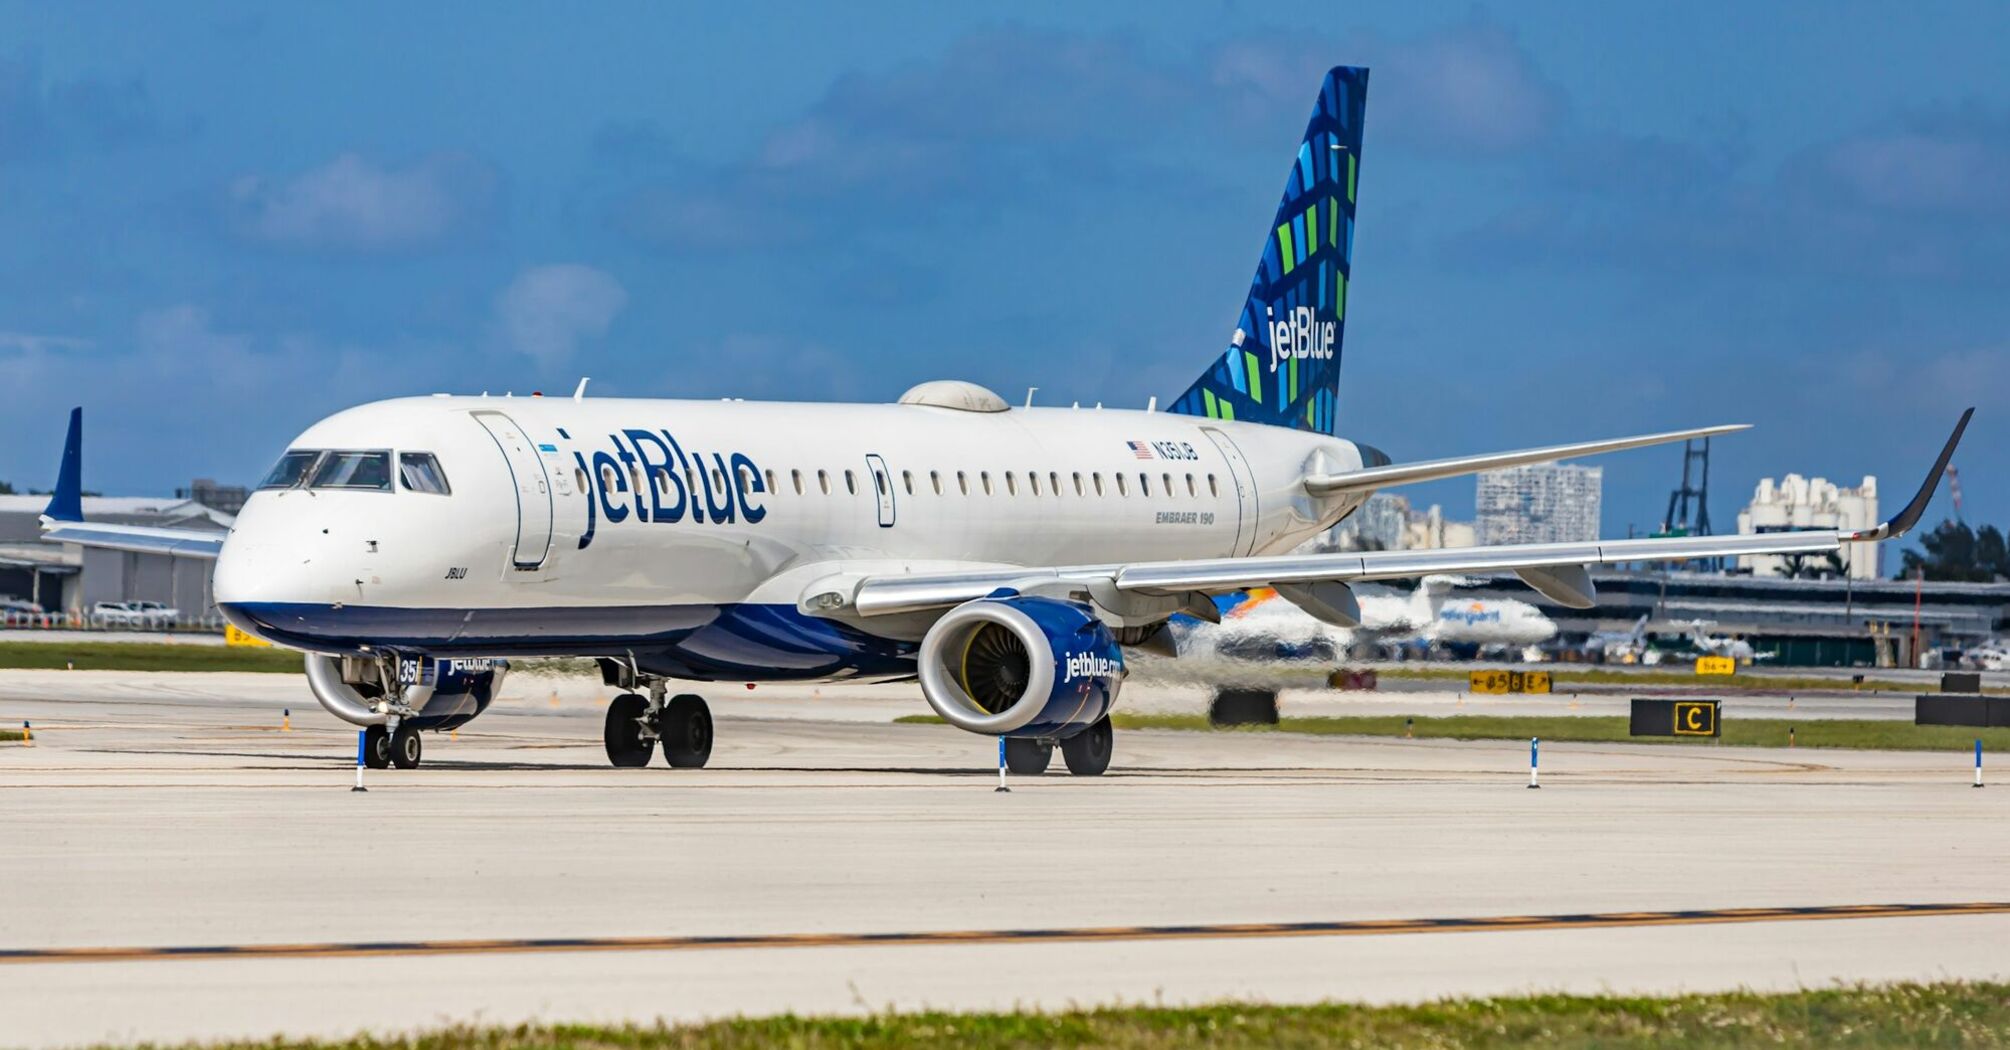 JetBlue Embraer 190 aircraft on the tarmac at an airport with clear skies in the background 